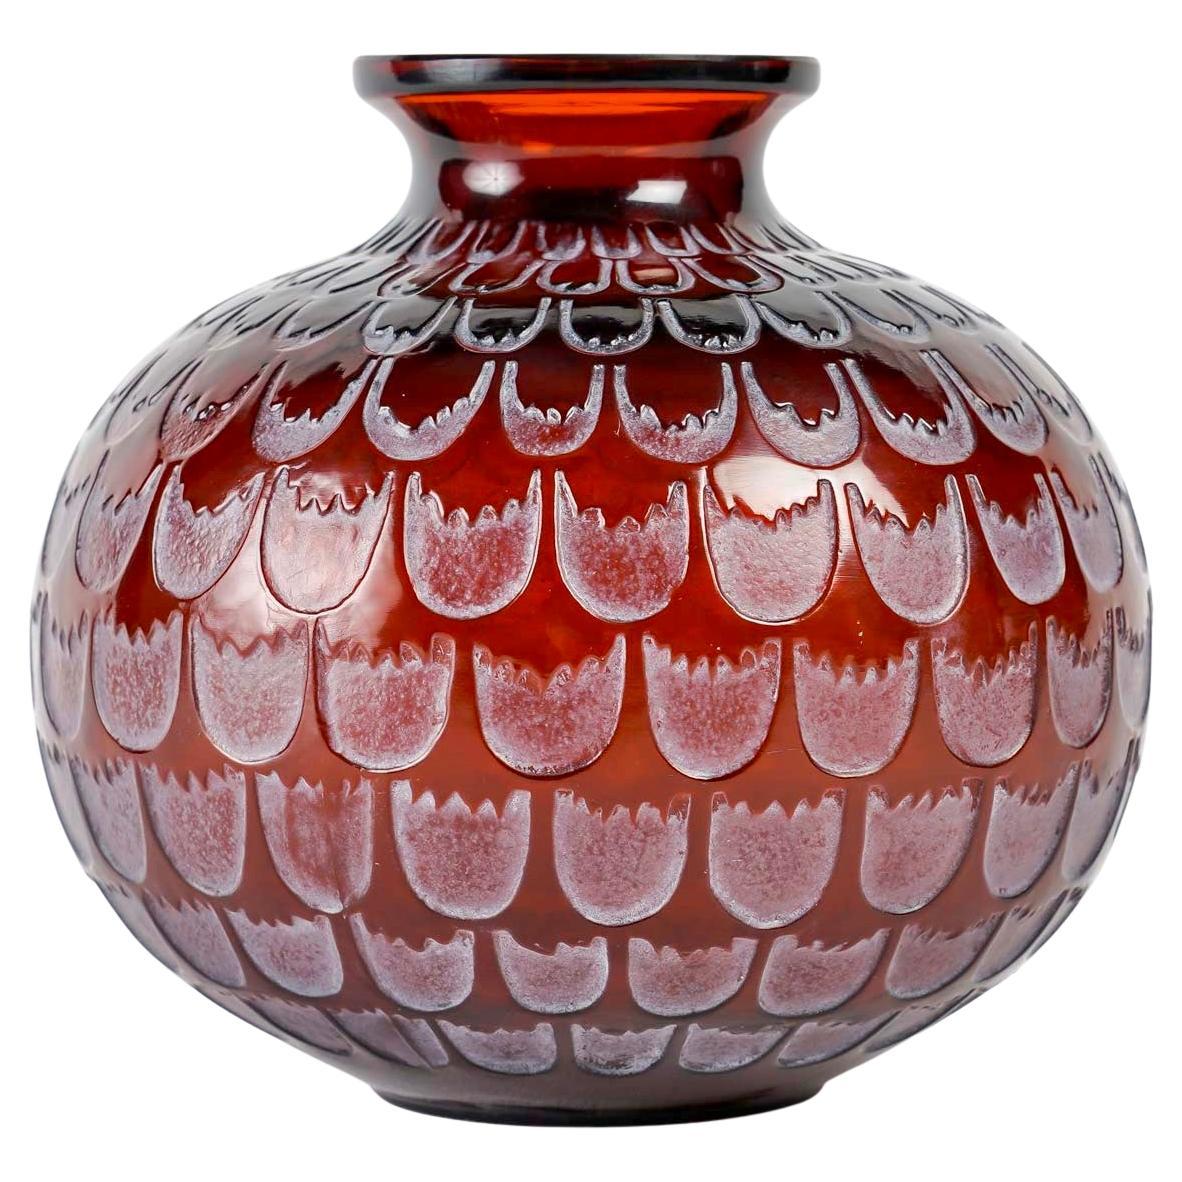 1930 Rene Lalique Vase Grenade Red Amber Glass with White Patina